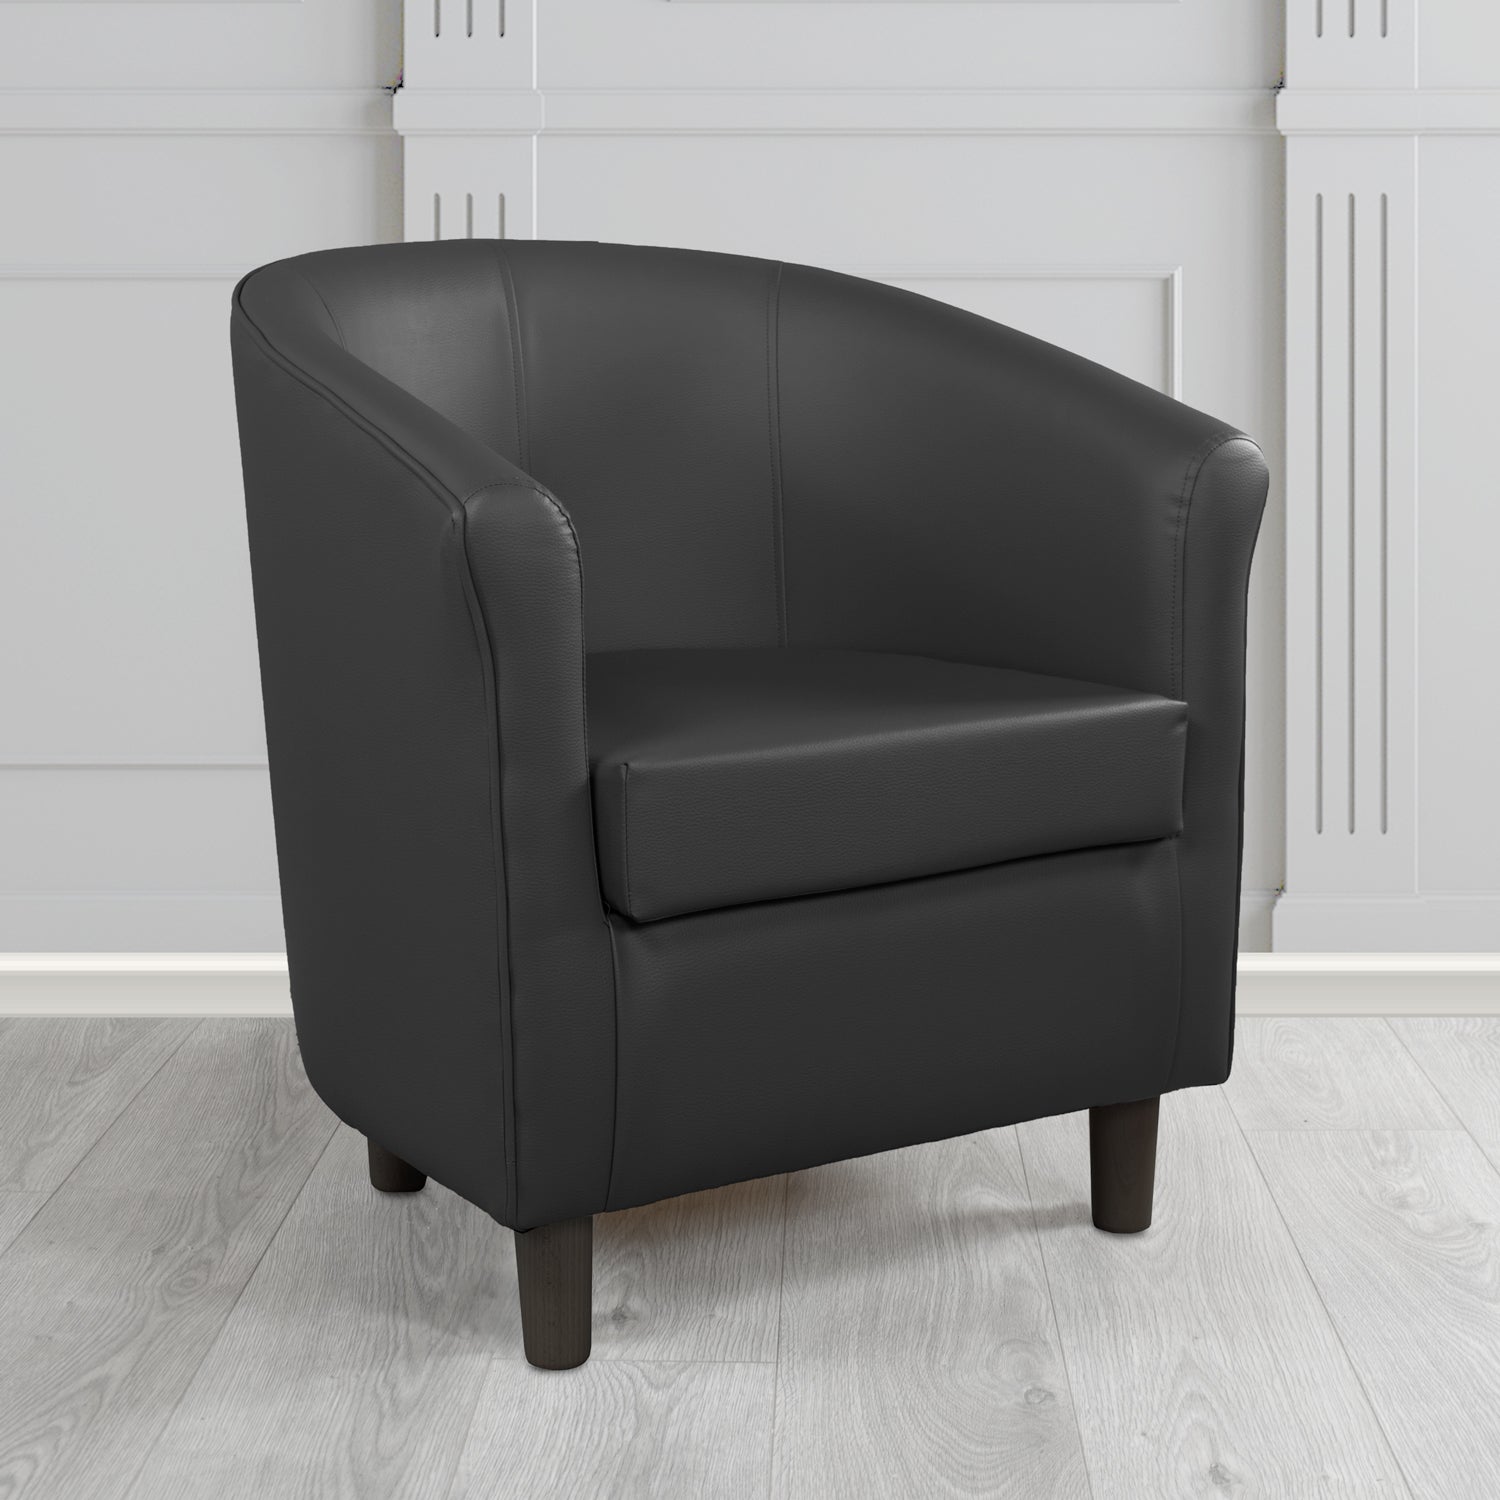 Tuscany Tub Chair in Madrid Black Faux Leather